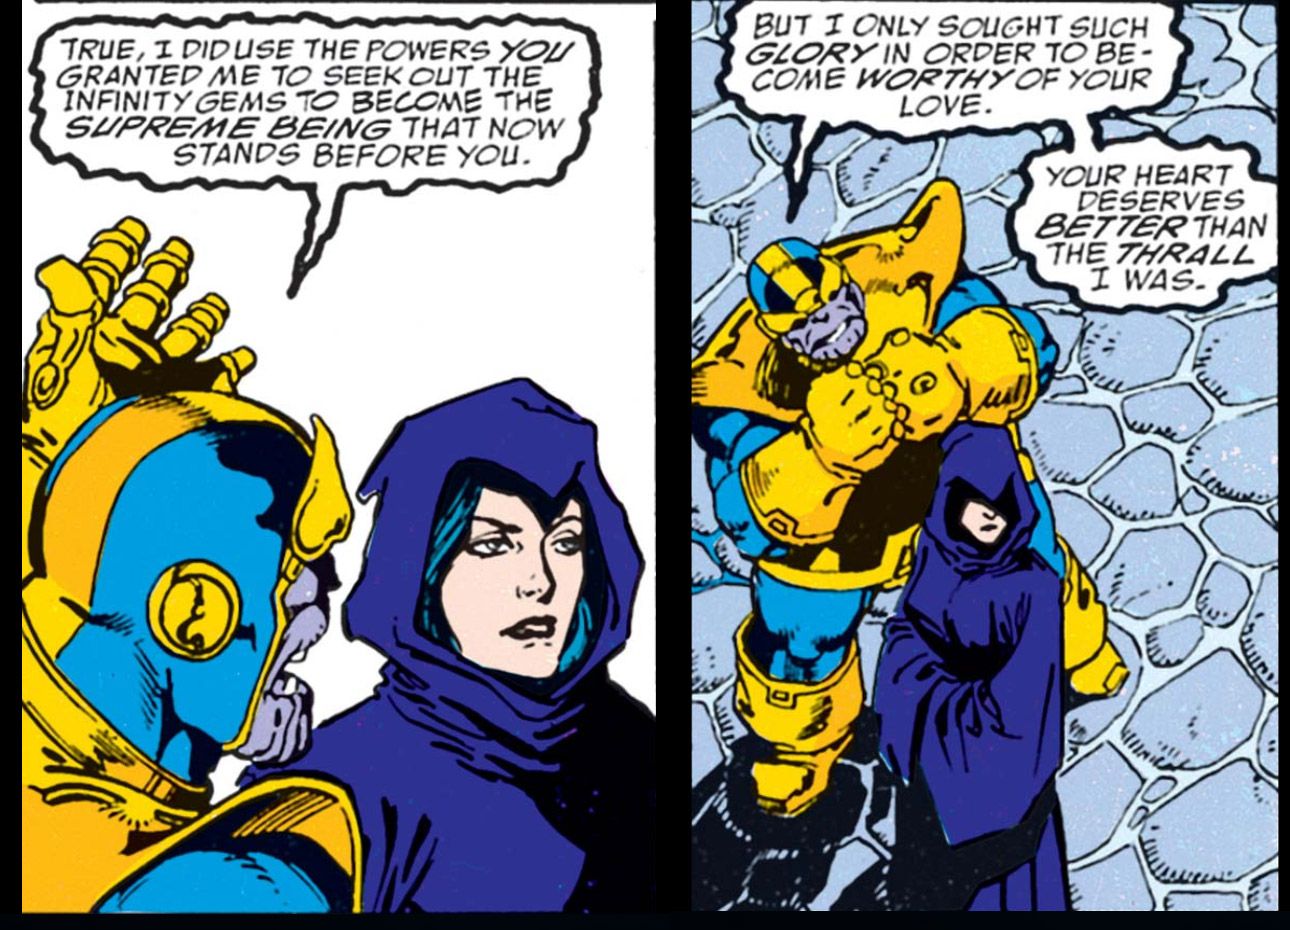 Mistress Death in The Infinity Gauntlet